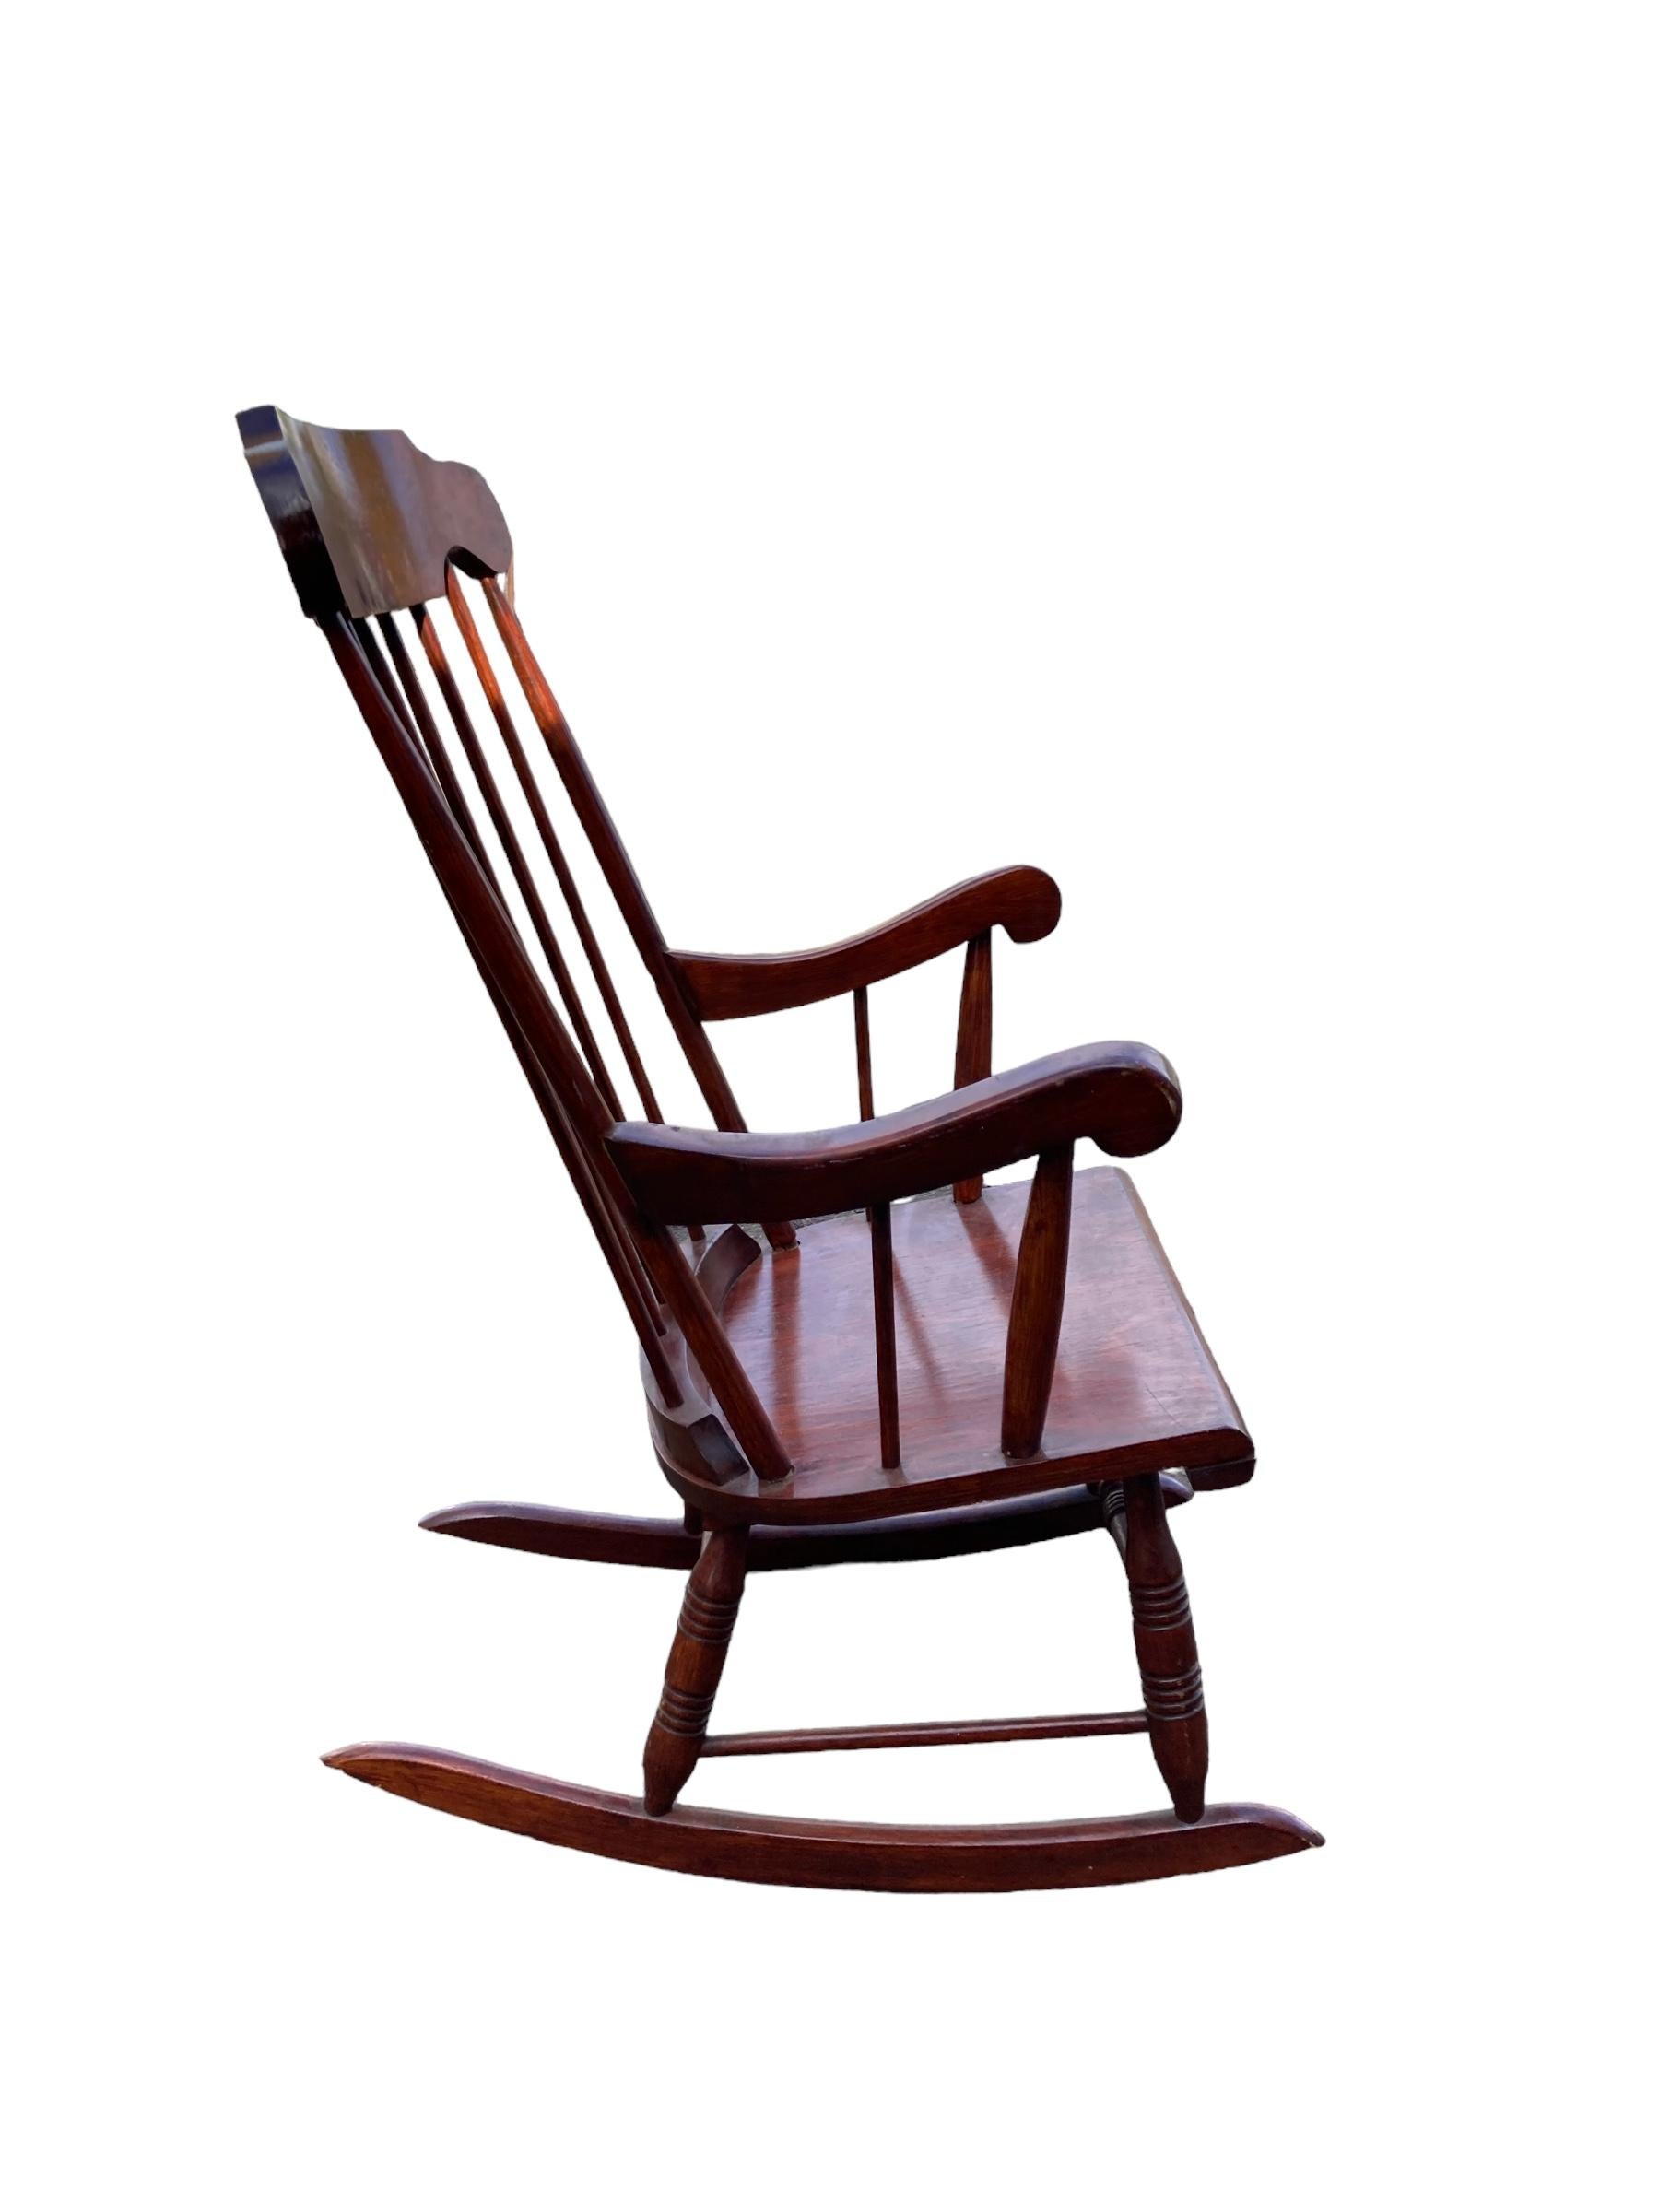 Early Victorian Windsor style rocking chair, Mid 20th Century, Red Mahogany wood For Sale